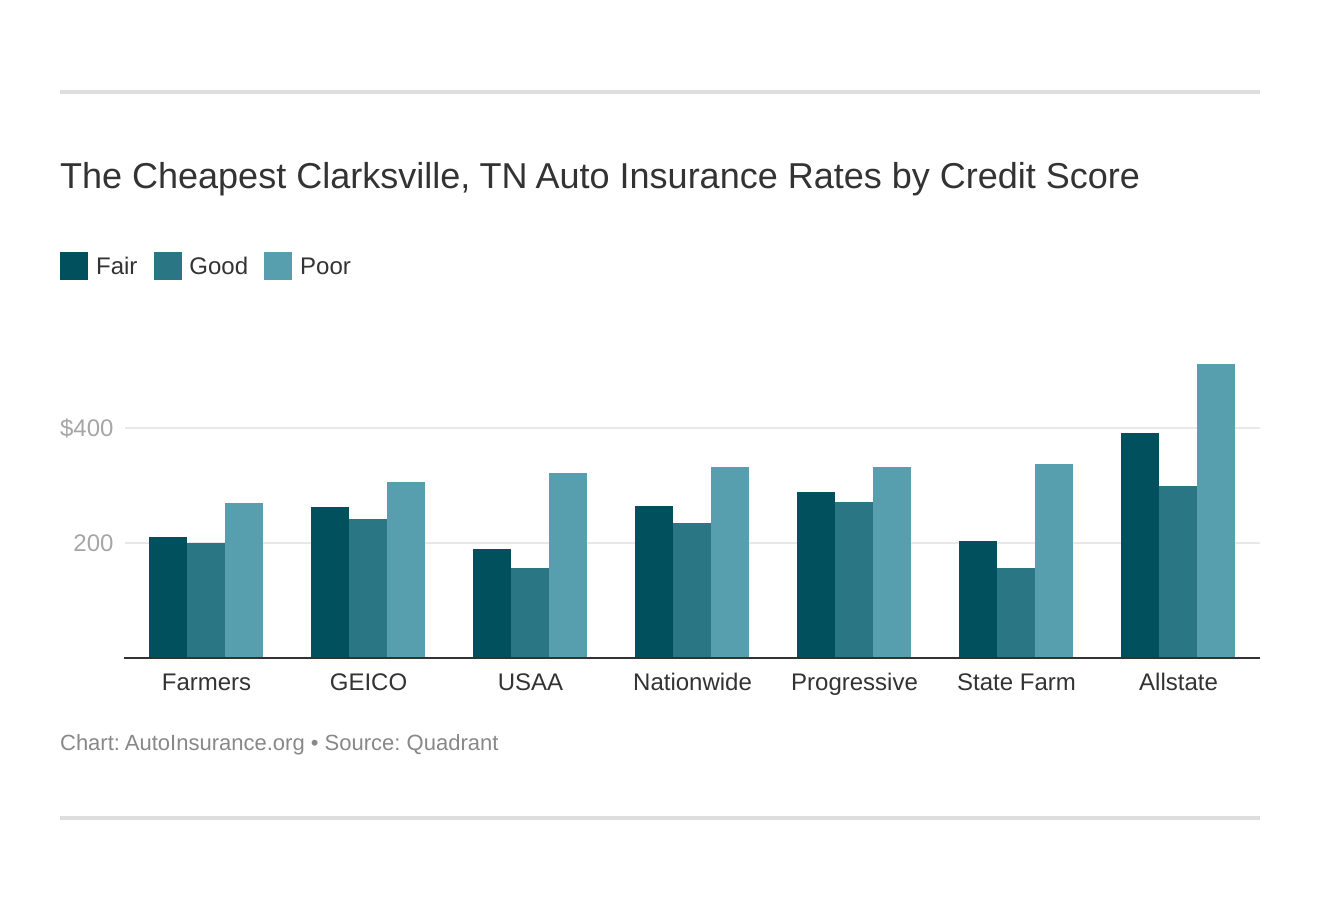 The Cheapest Clarksville, TN Auto Insurance Rates by Credit Score